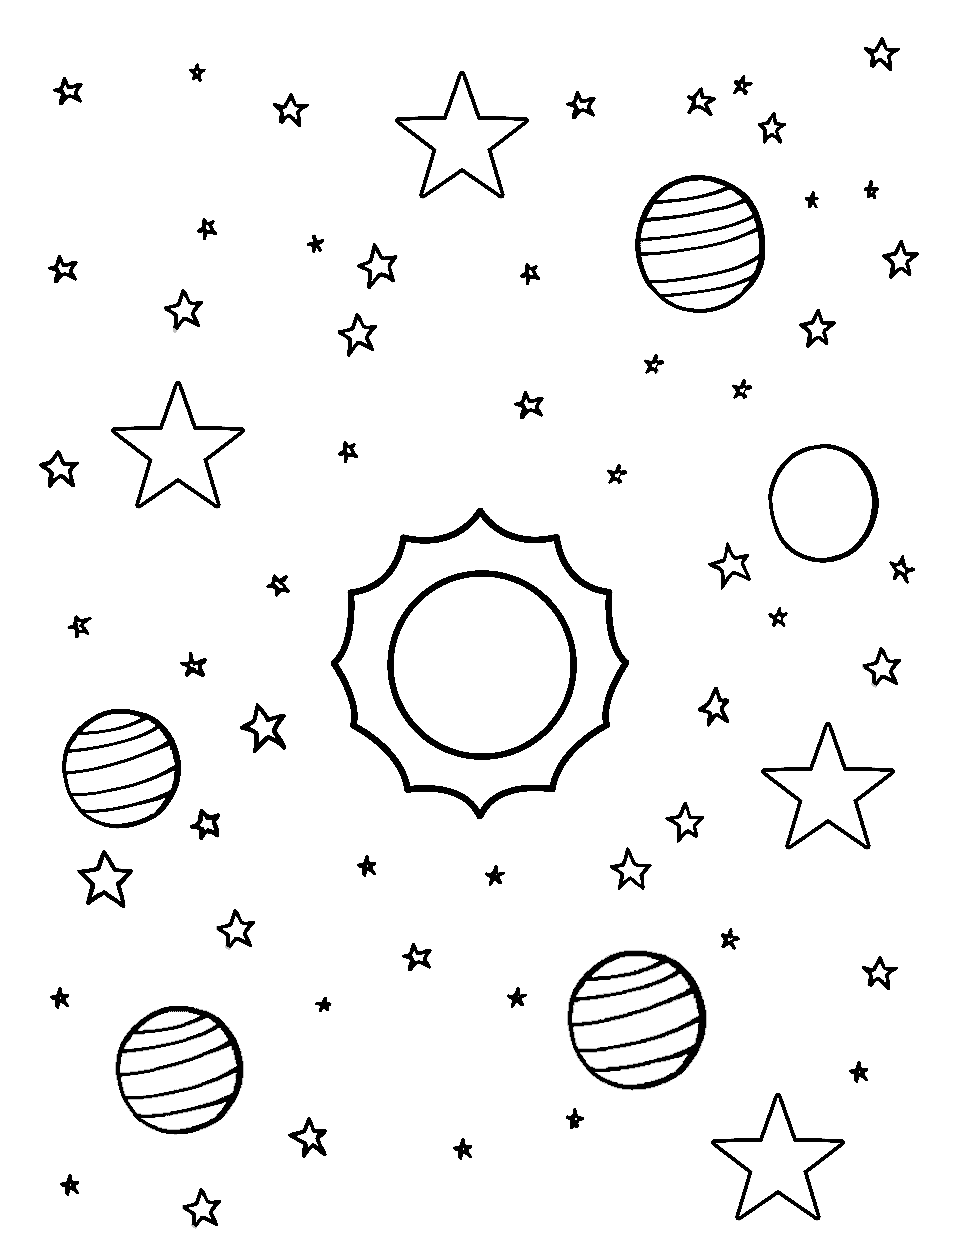 Science of Stars Coloring Page - Different types of stars arranged together.